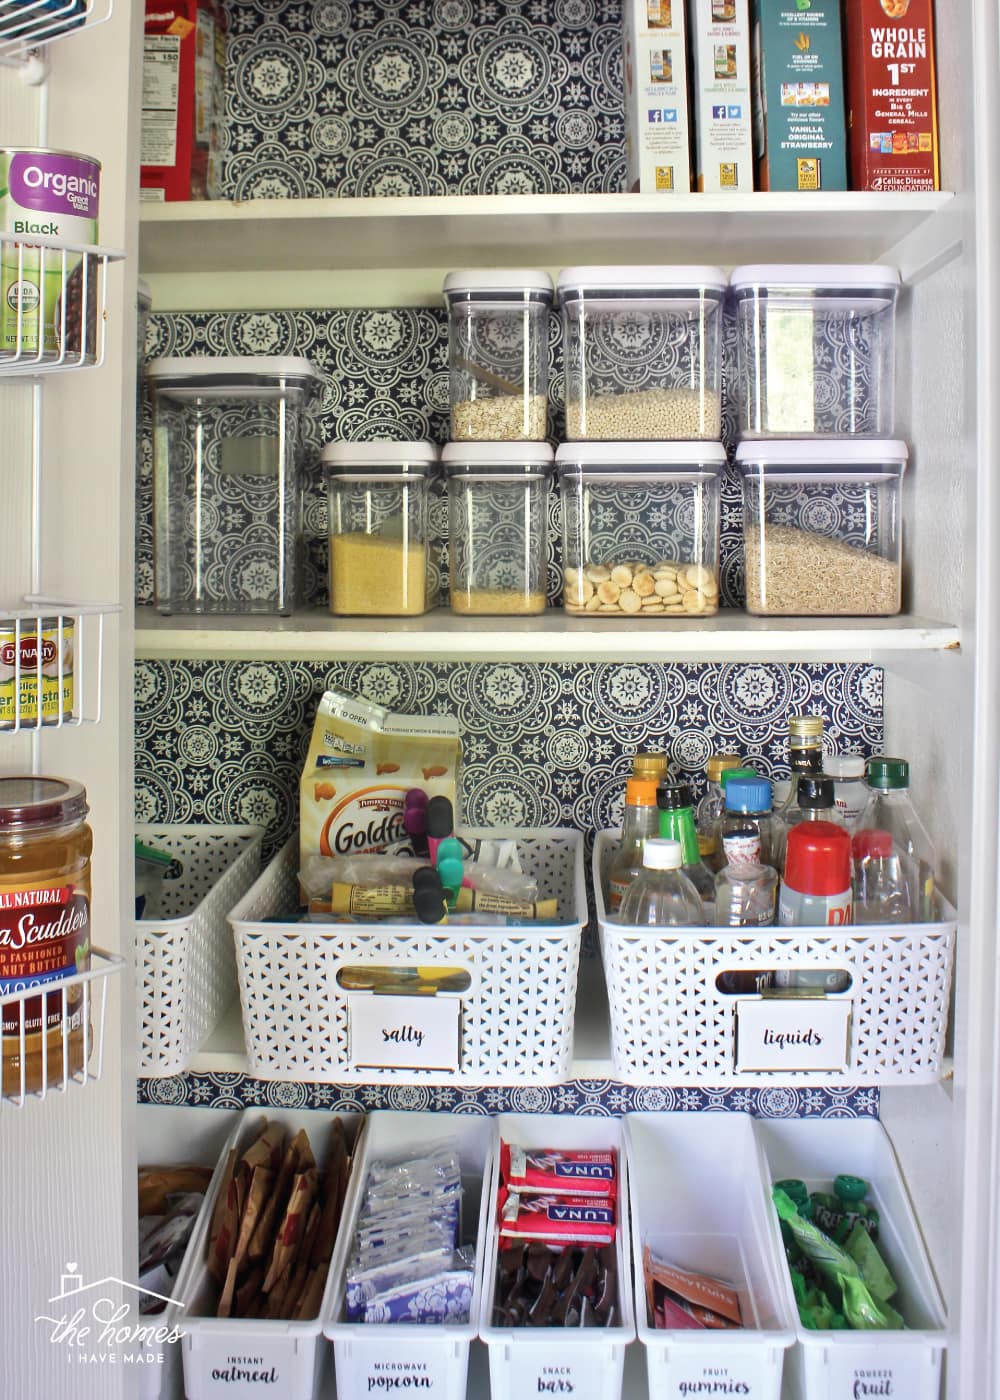 Take a tour of a perfectly organized pantry with all sorts of unique and smart food storage solutions!